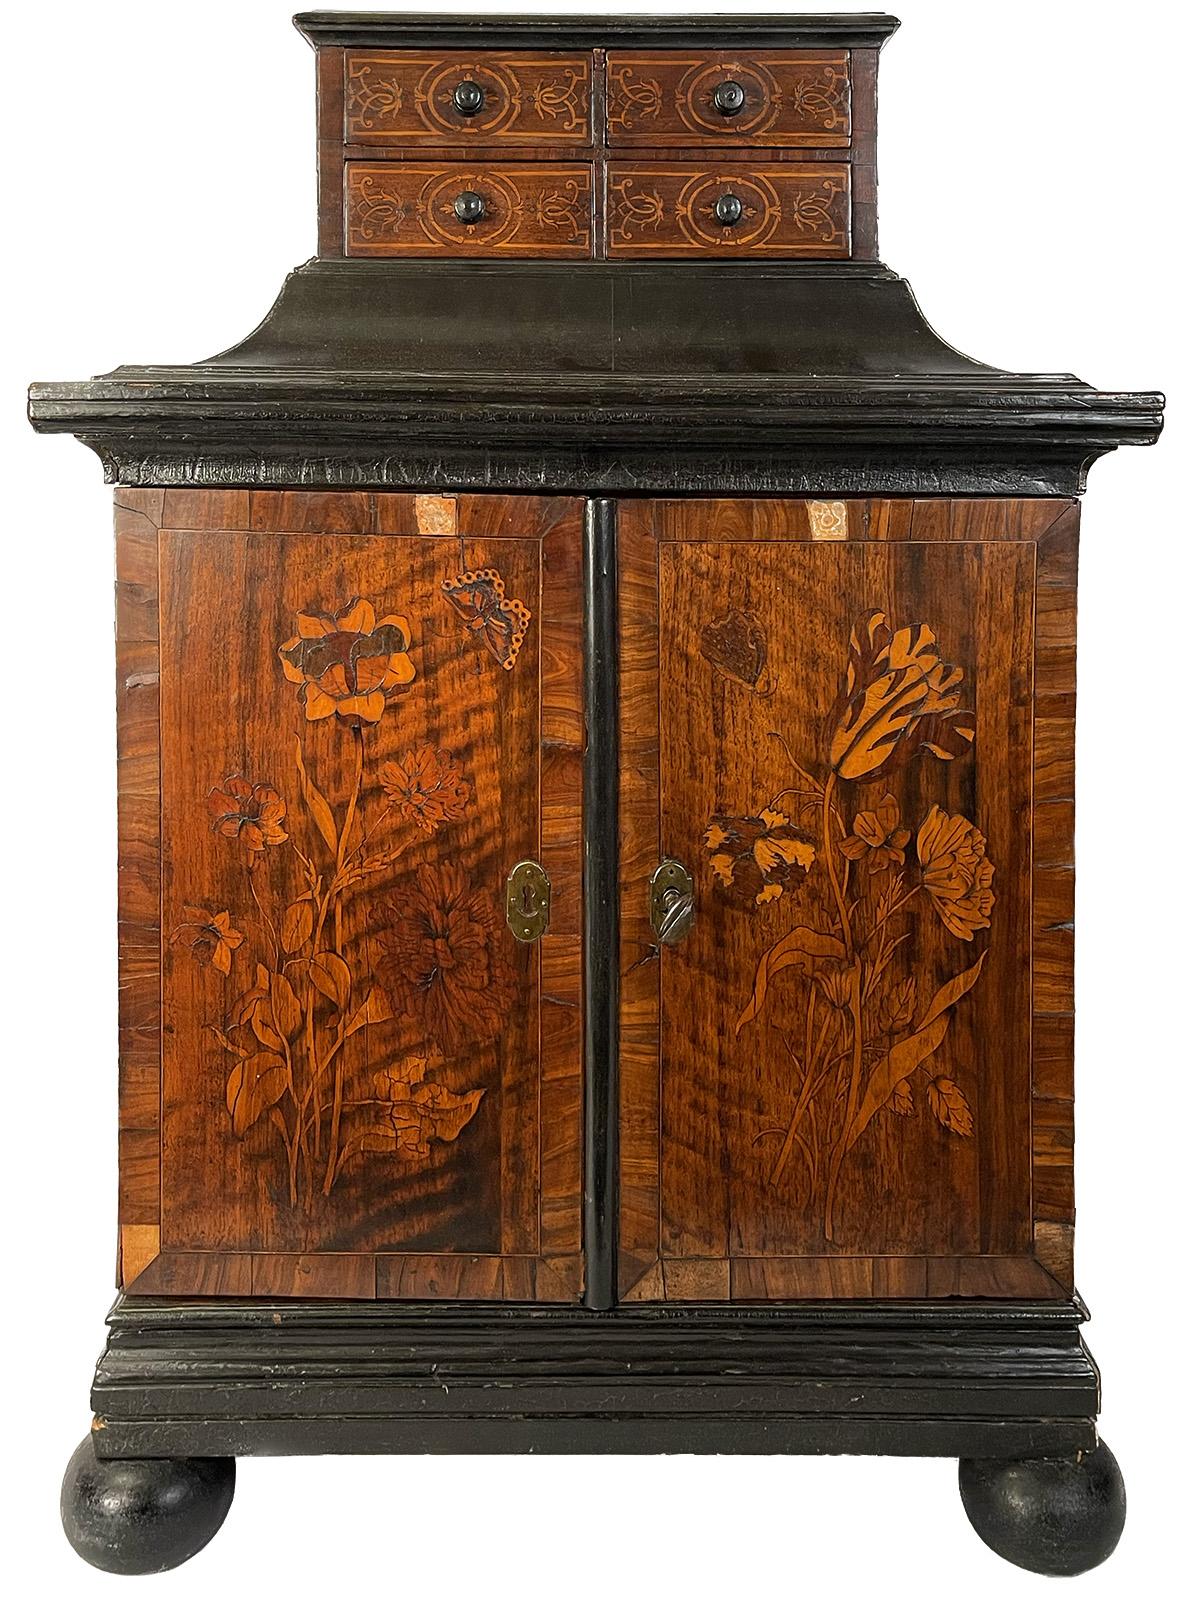 An 18th century Dutch jewelry or valuables cabinet, with four inlaid drawers on top and butterfly and floral marquetry inlaid doors opening to fifteen marquetry drawers.

Dimensions: 27.5